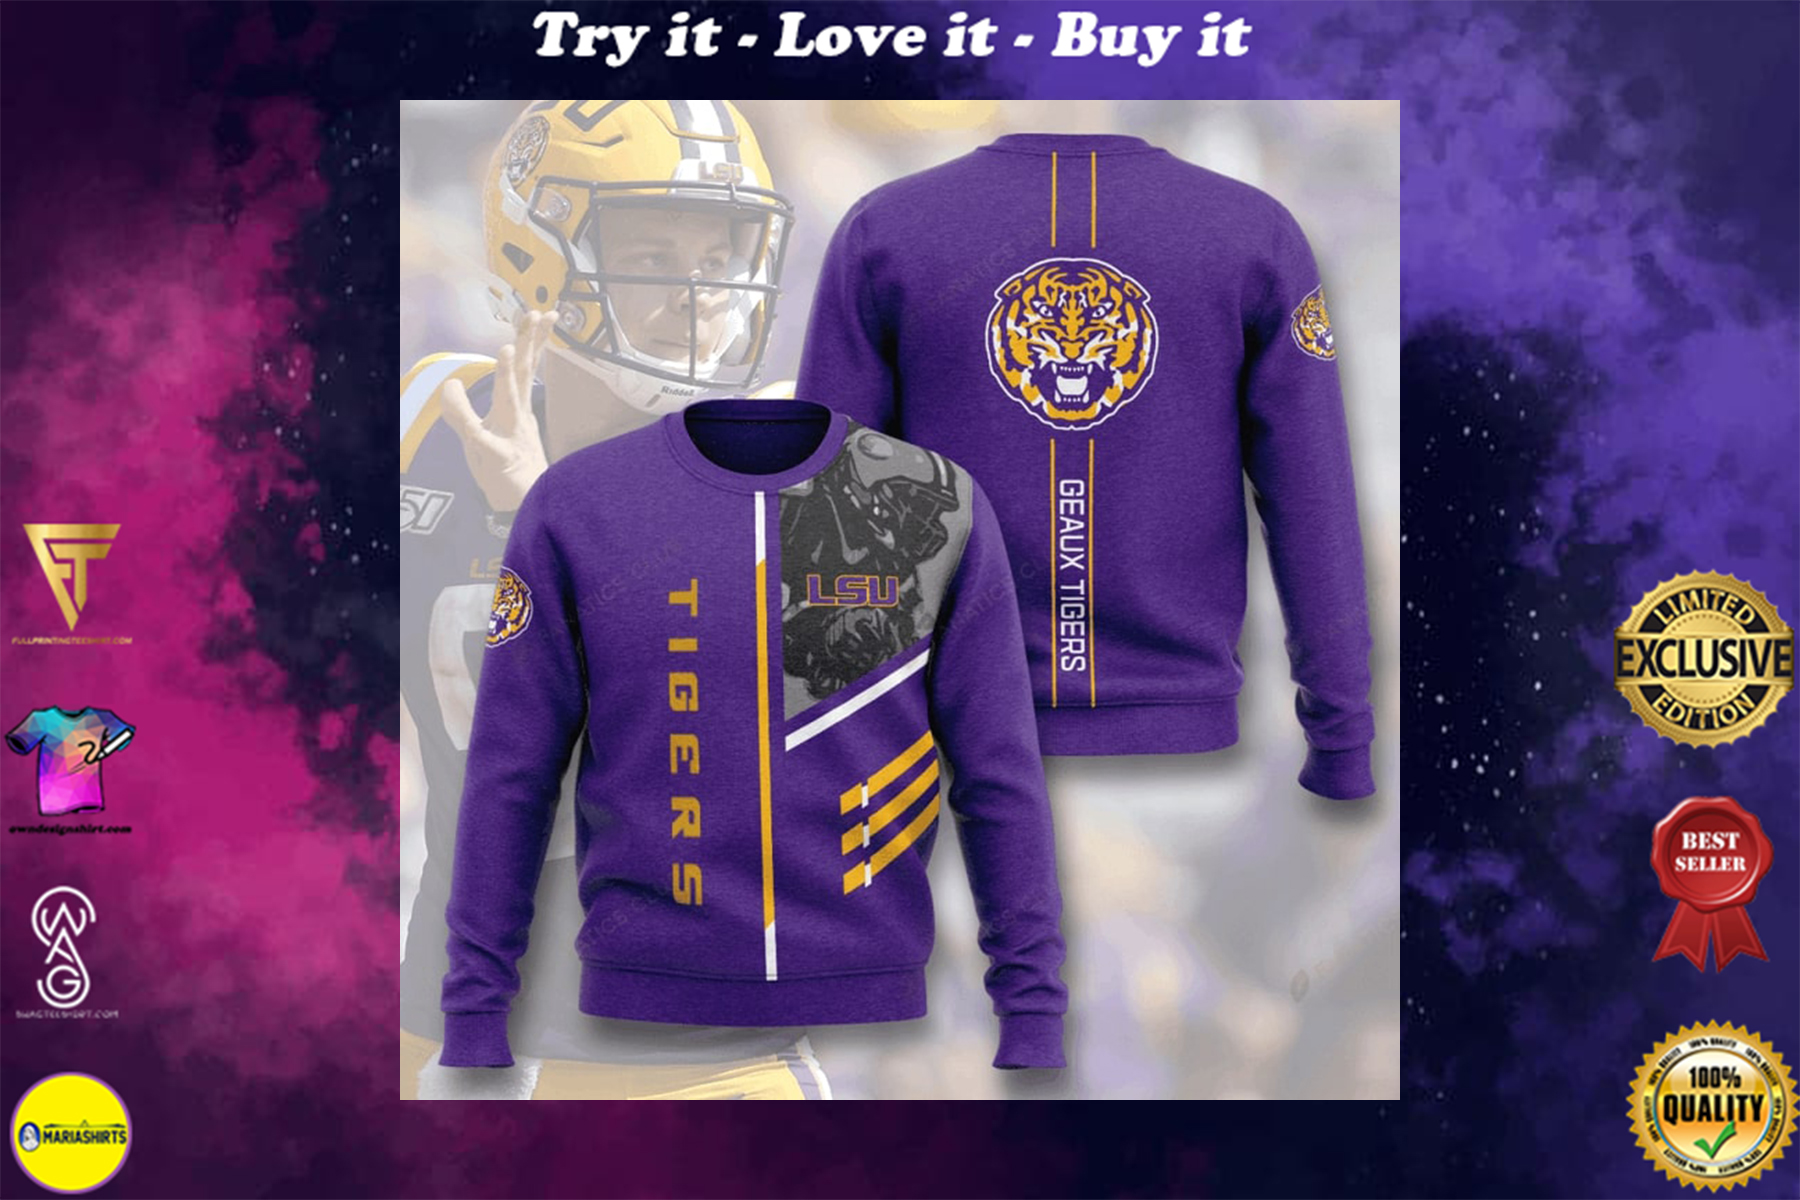 lsu tigers football geaux tigers full printing ugly sweater